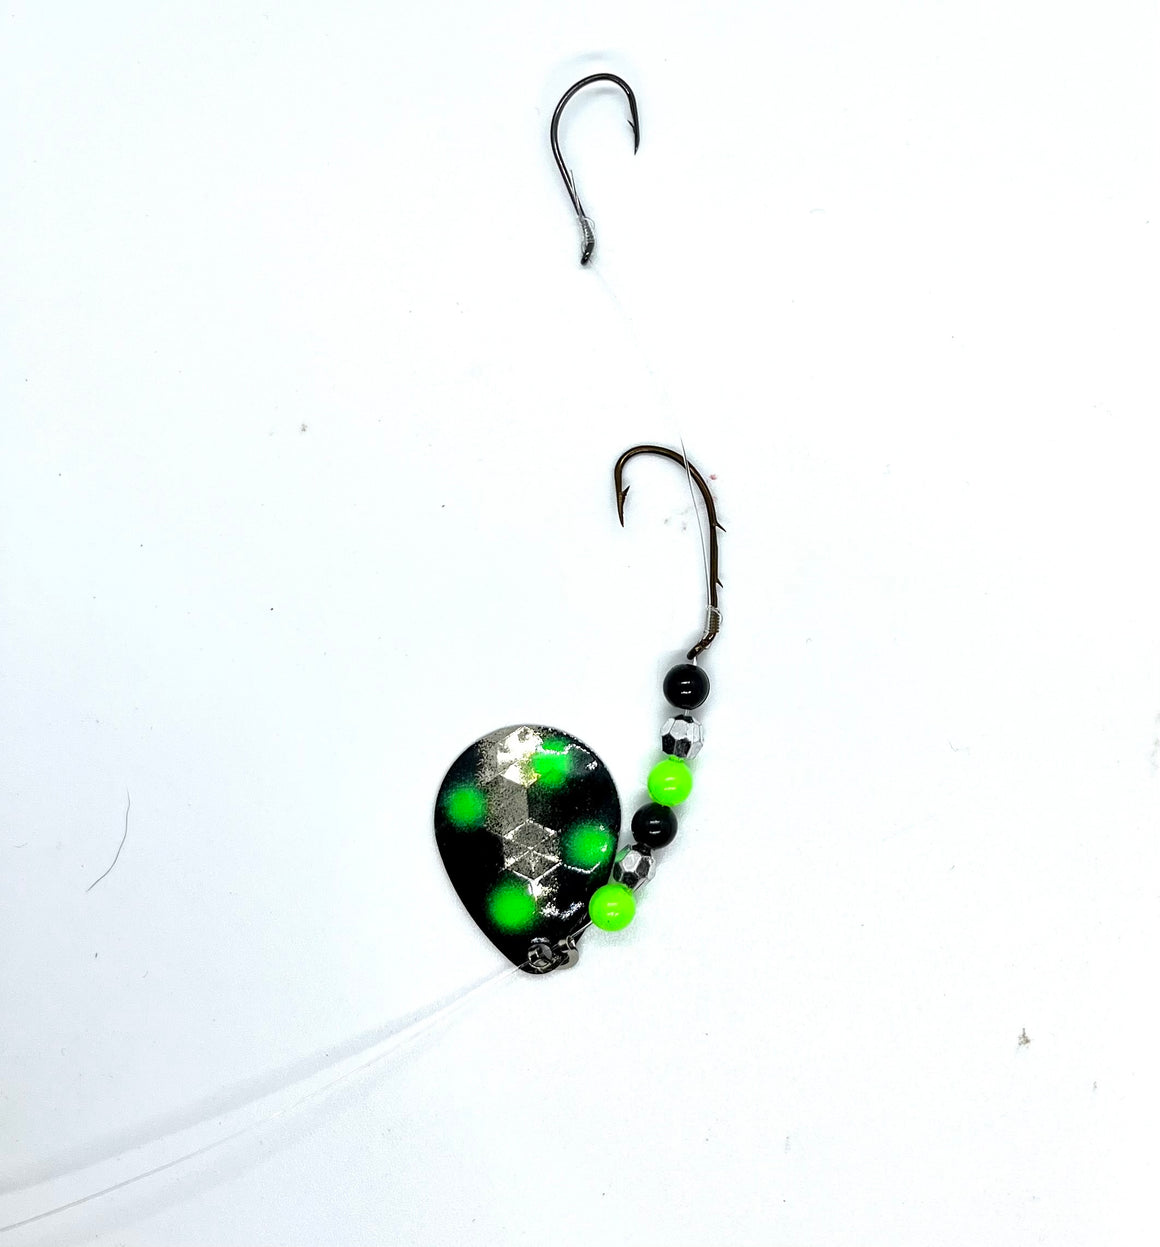  Wordens 695-CL Spin-N-Glo : Fishing Spinners And Spinnerbaits  : Sports & Outdoors